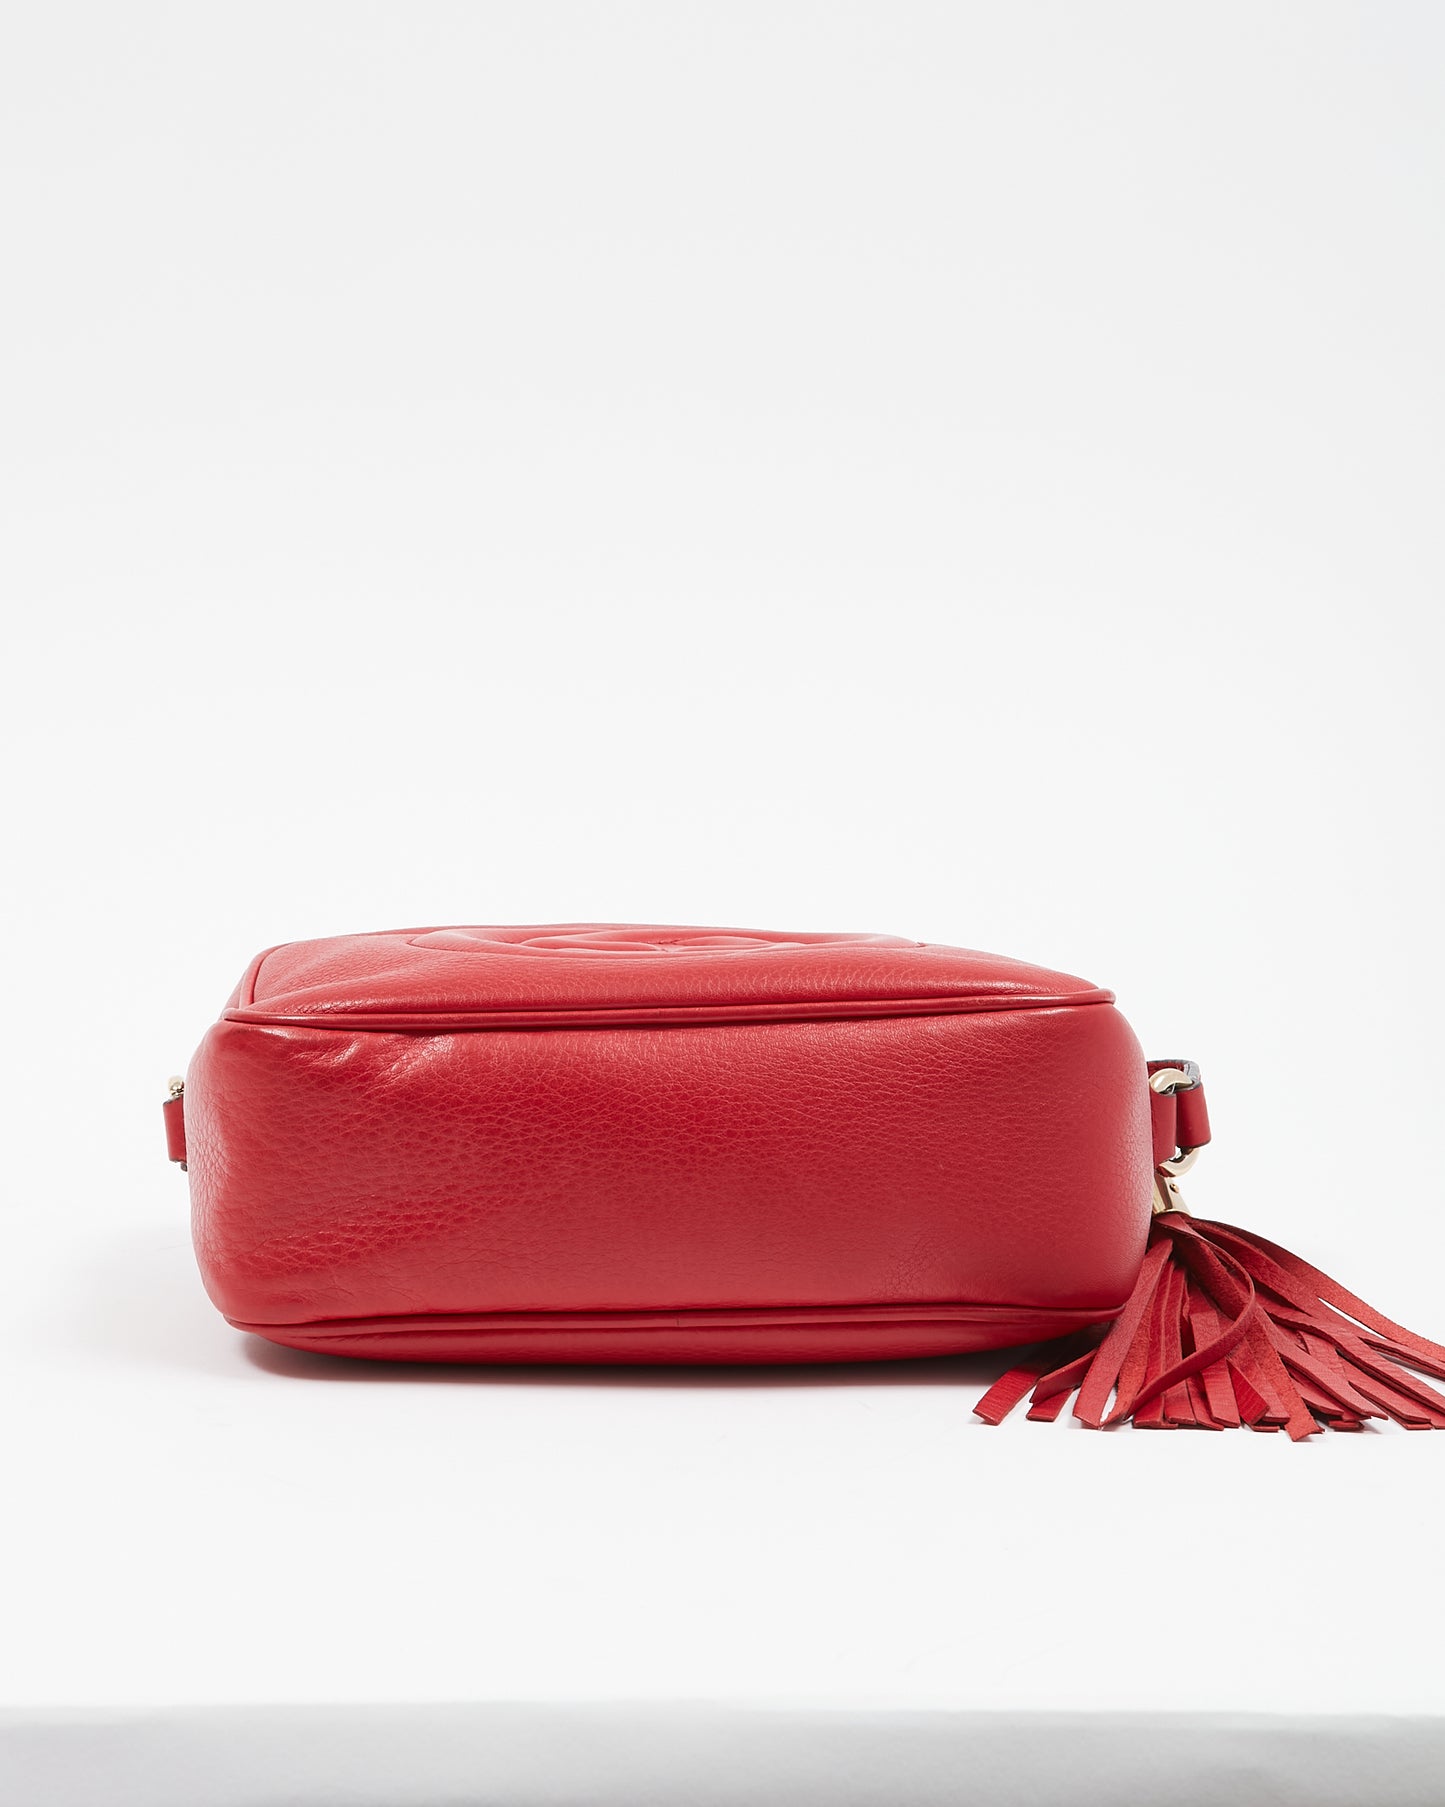 Gucci Red Pebbled Leather Soho Disco Camera bag